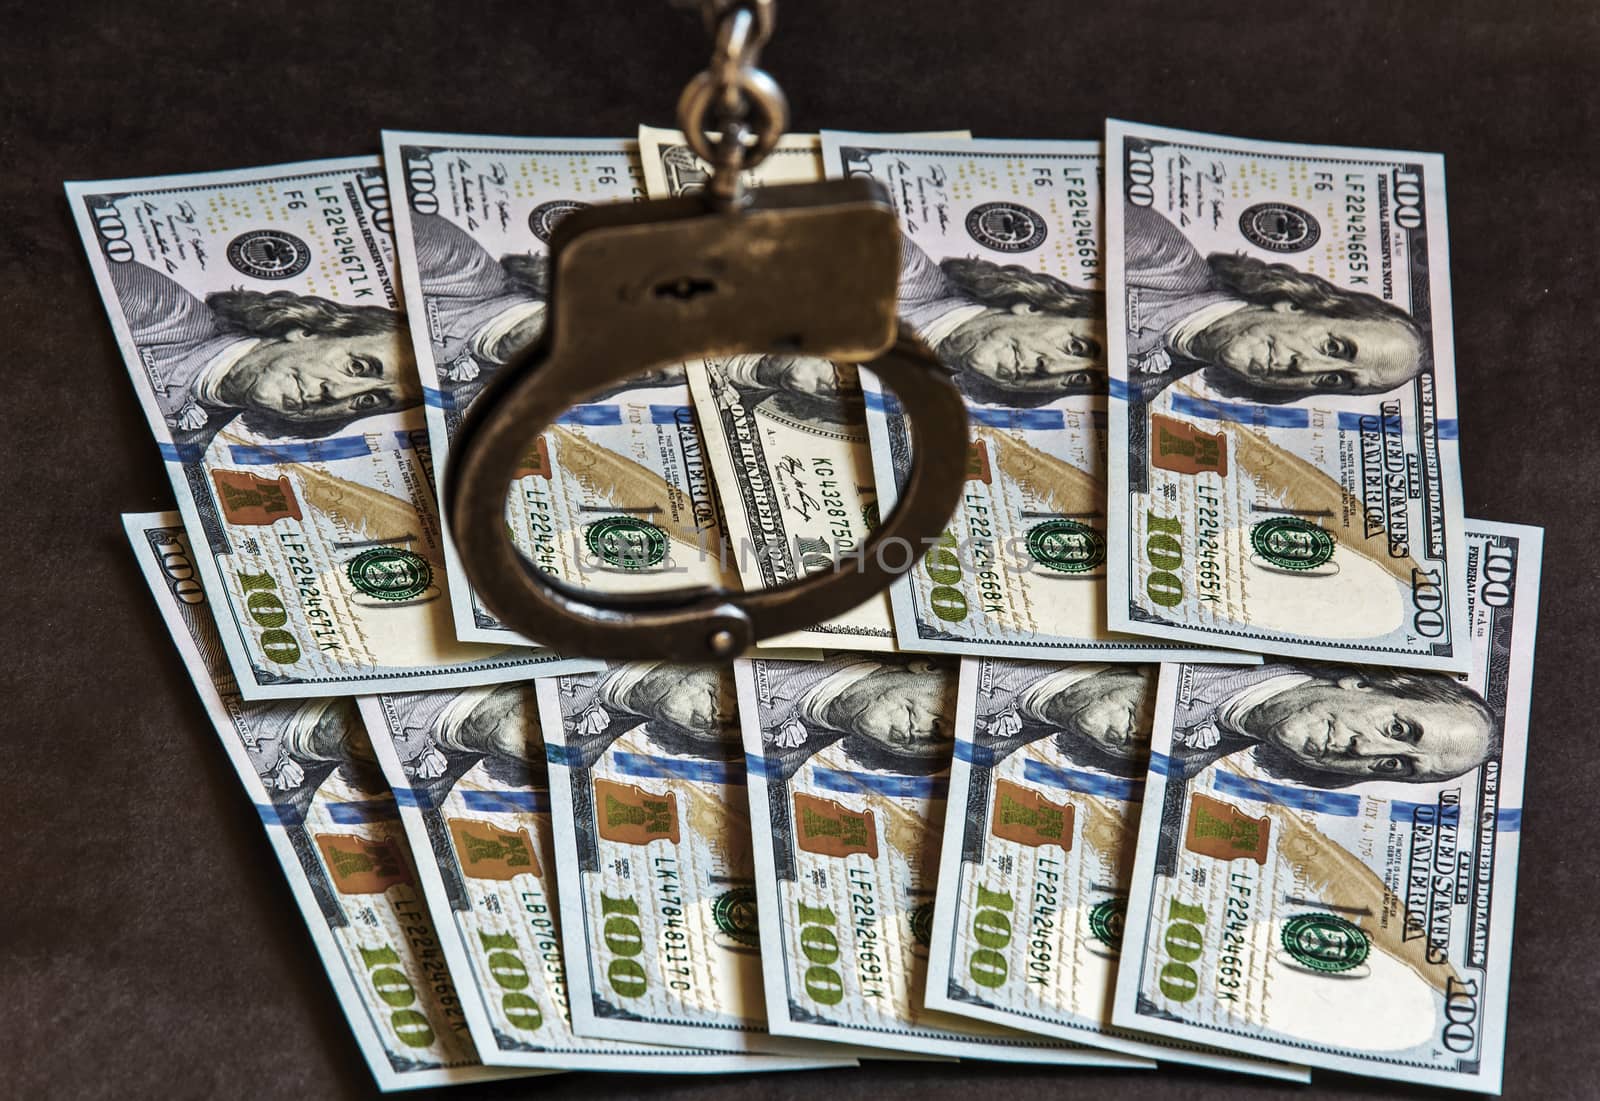 Handcuffs on one hundred banknotes of US dollars by Grommik